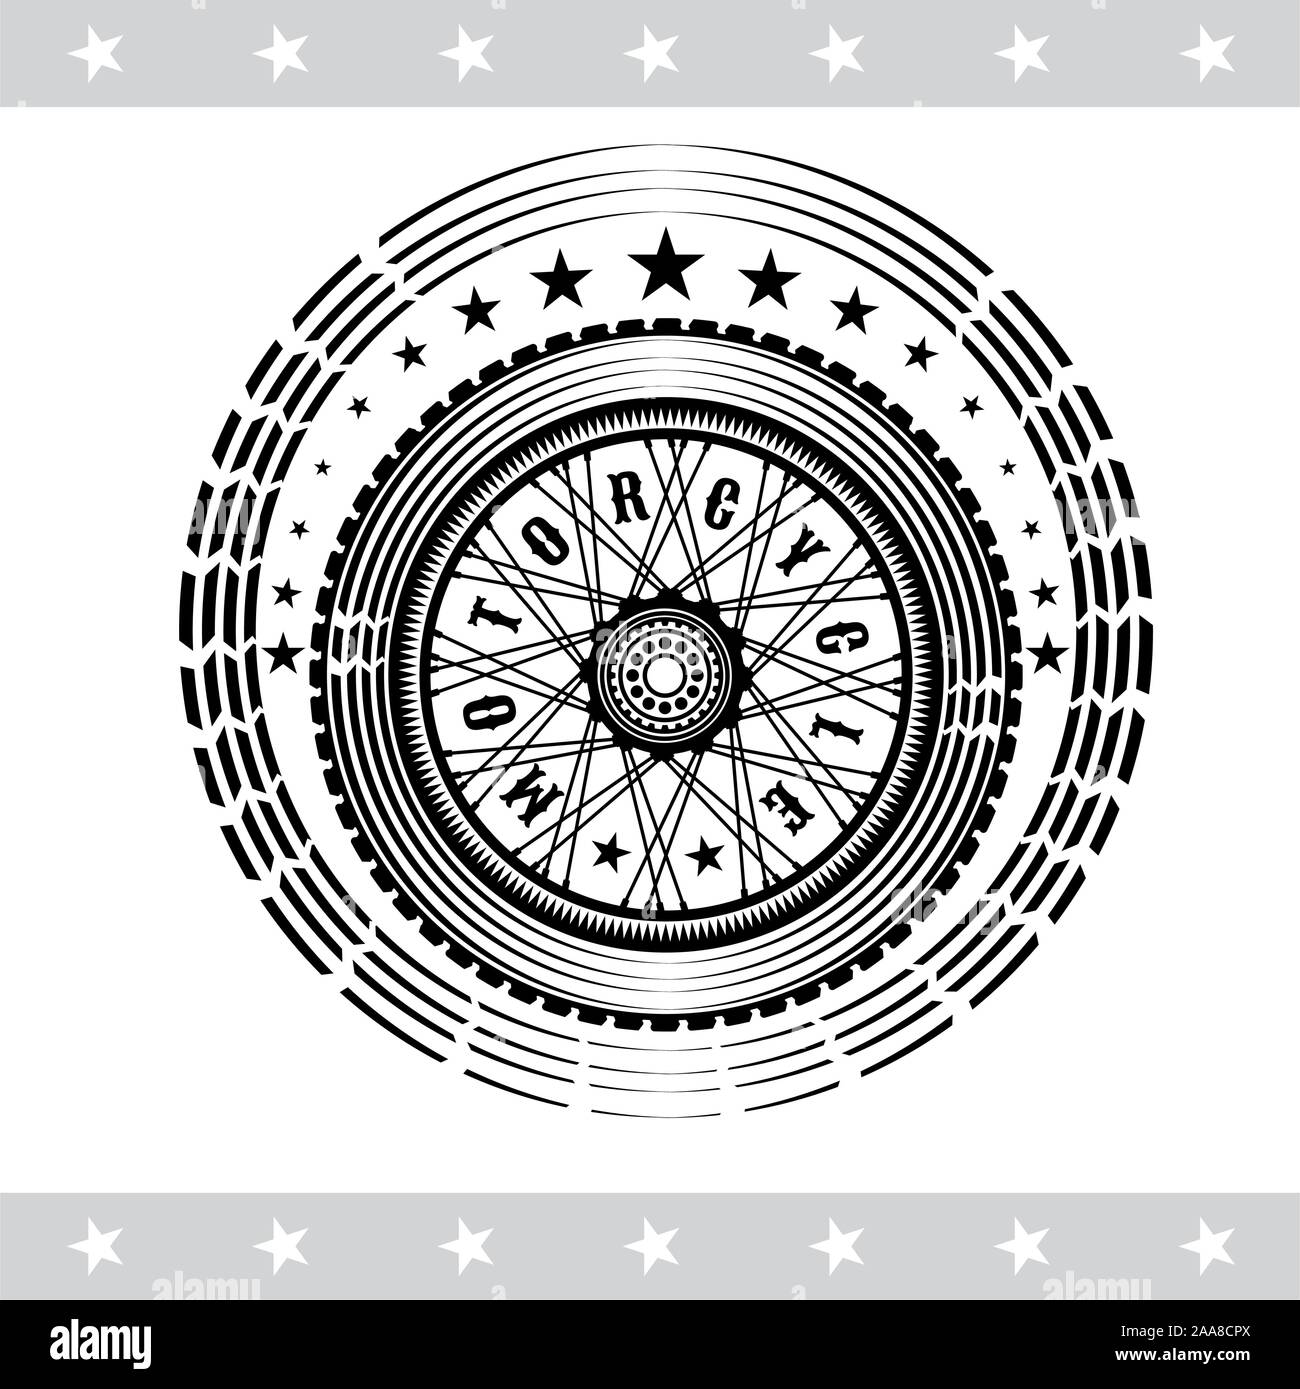 Motorbike wheel in side view with stars. Vintage motorcycle design on white Stock Vector